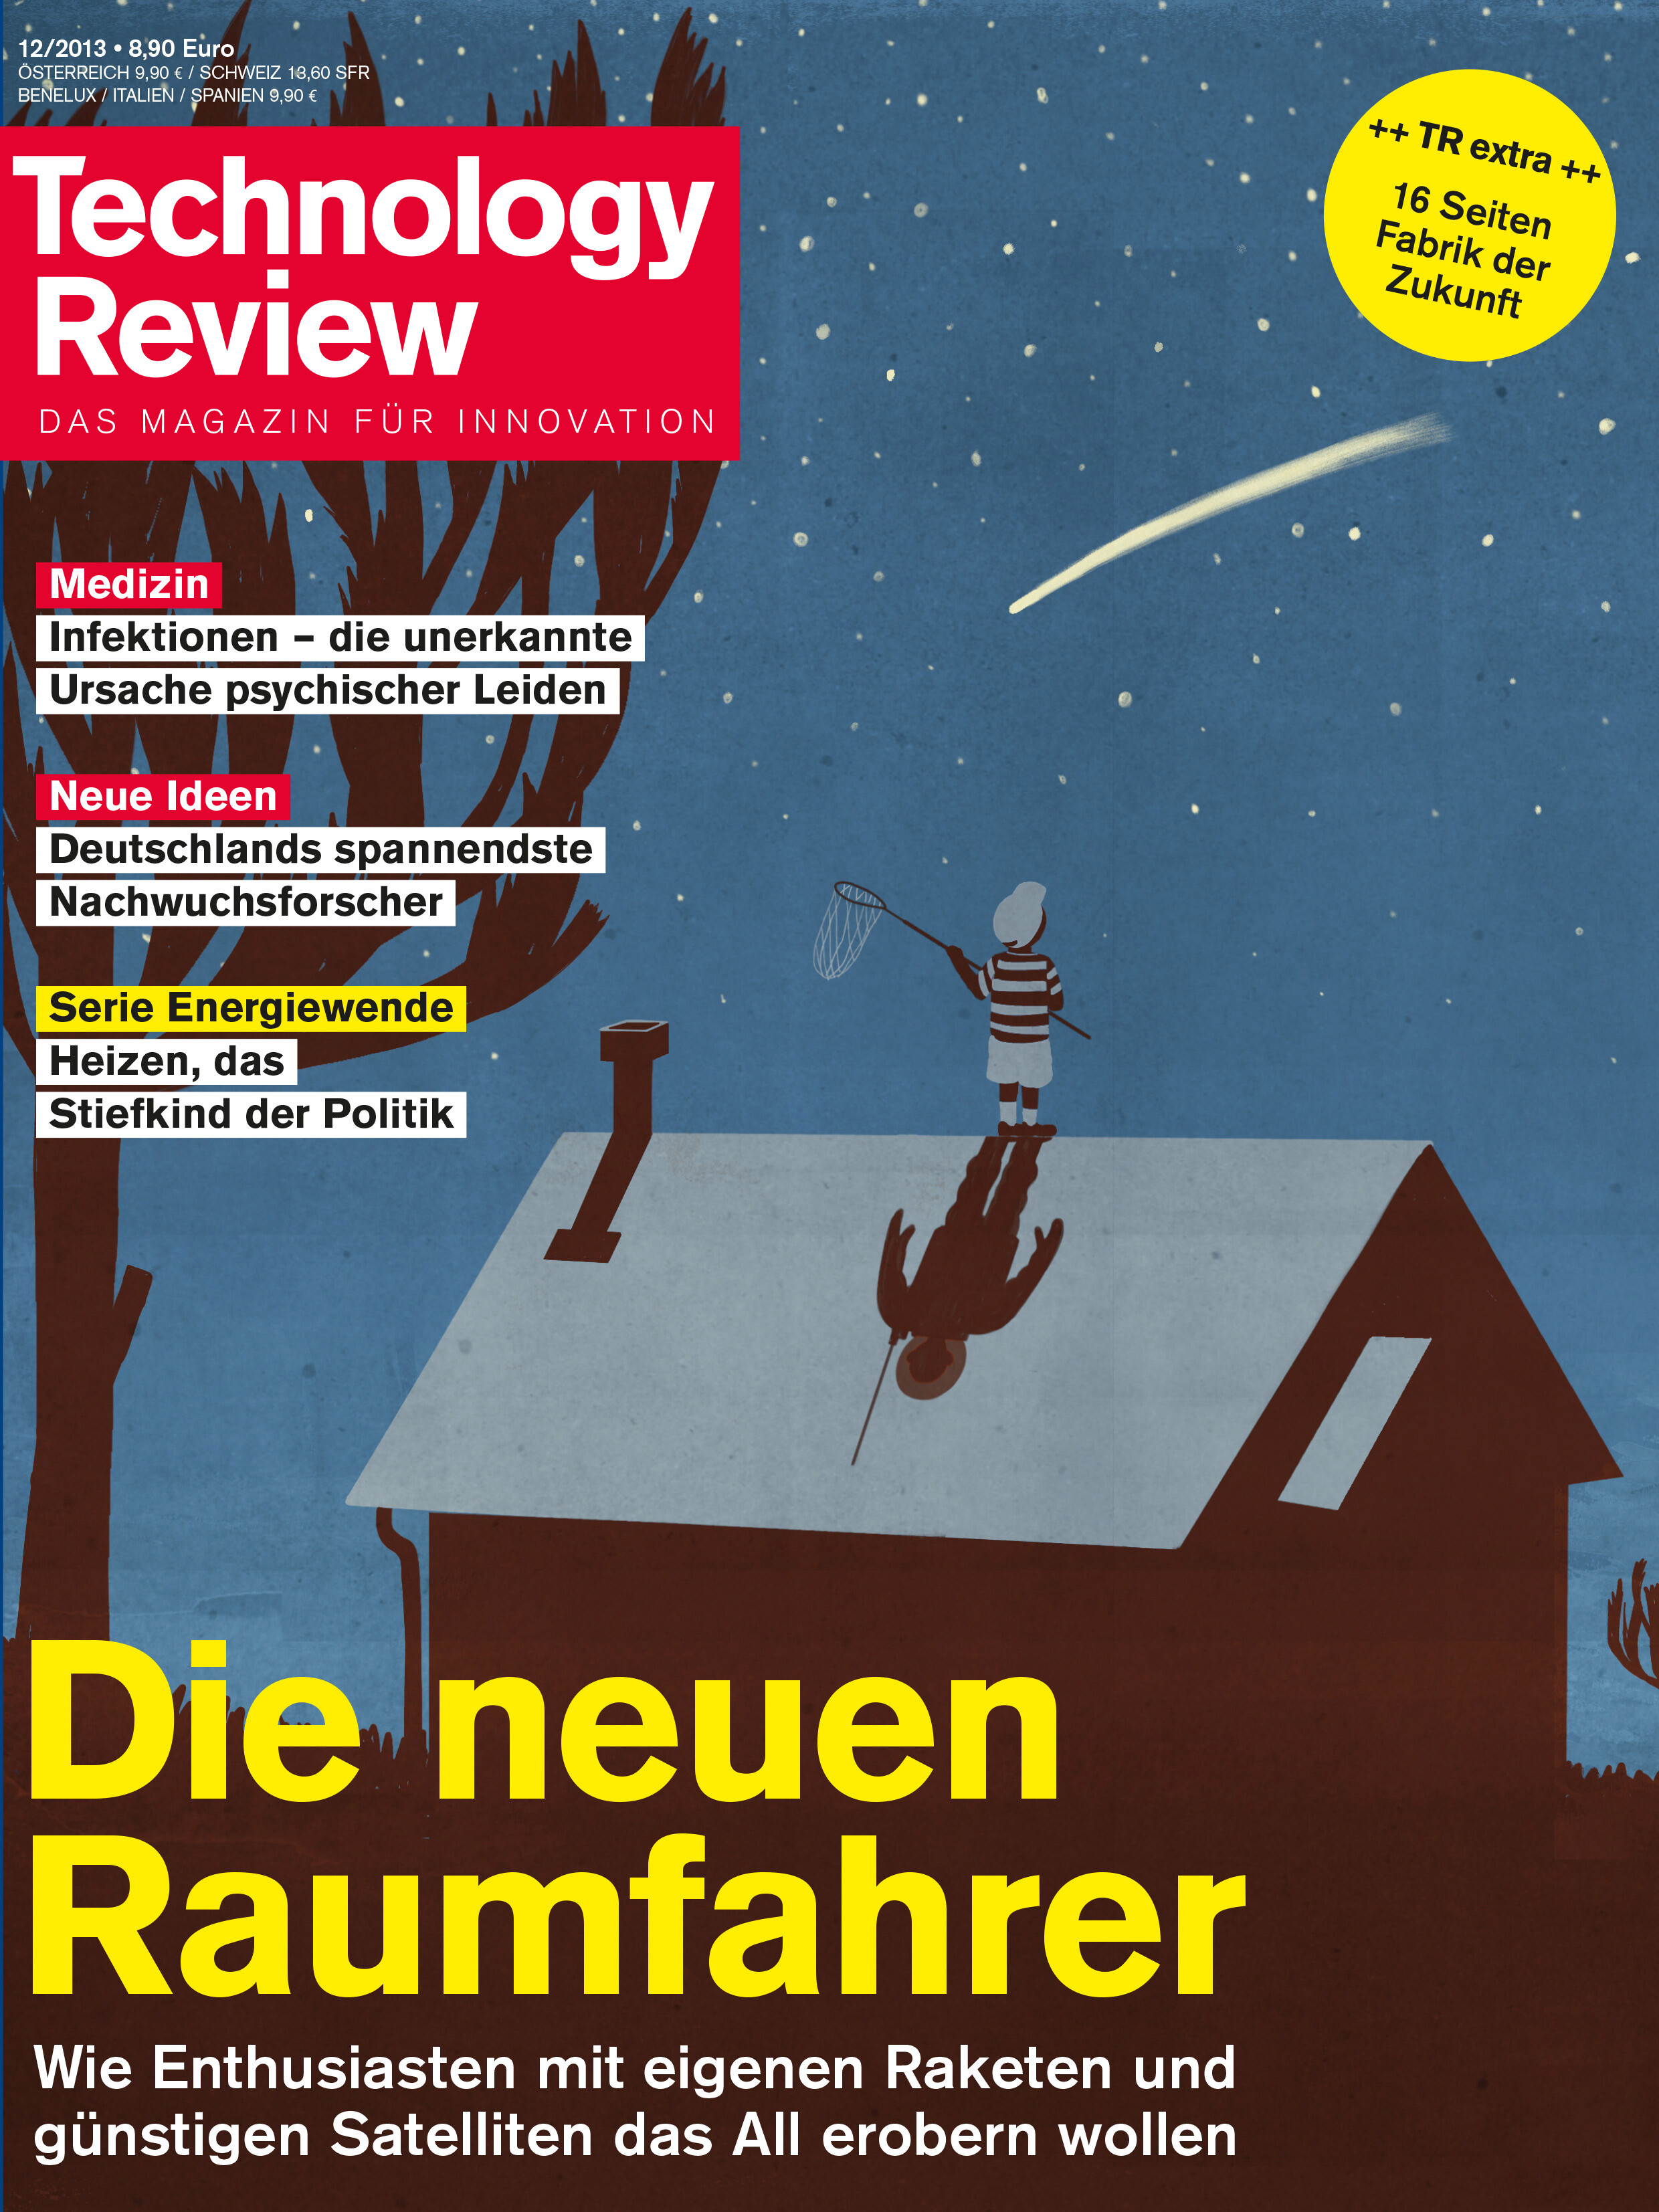 Technology Review 12/2013